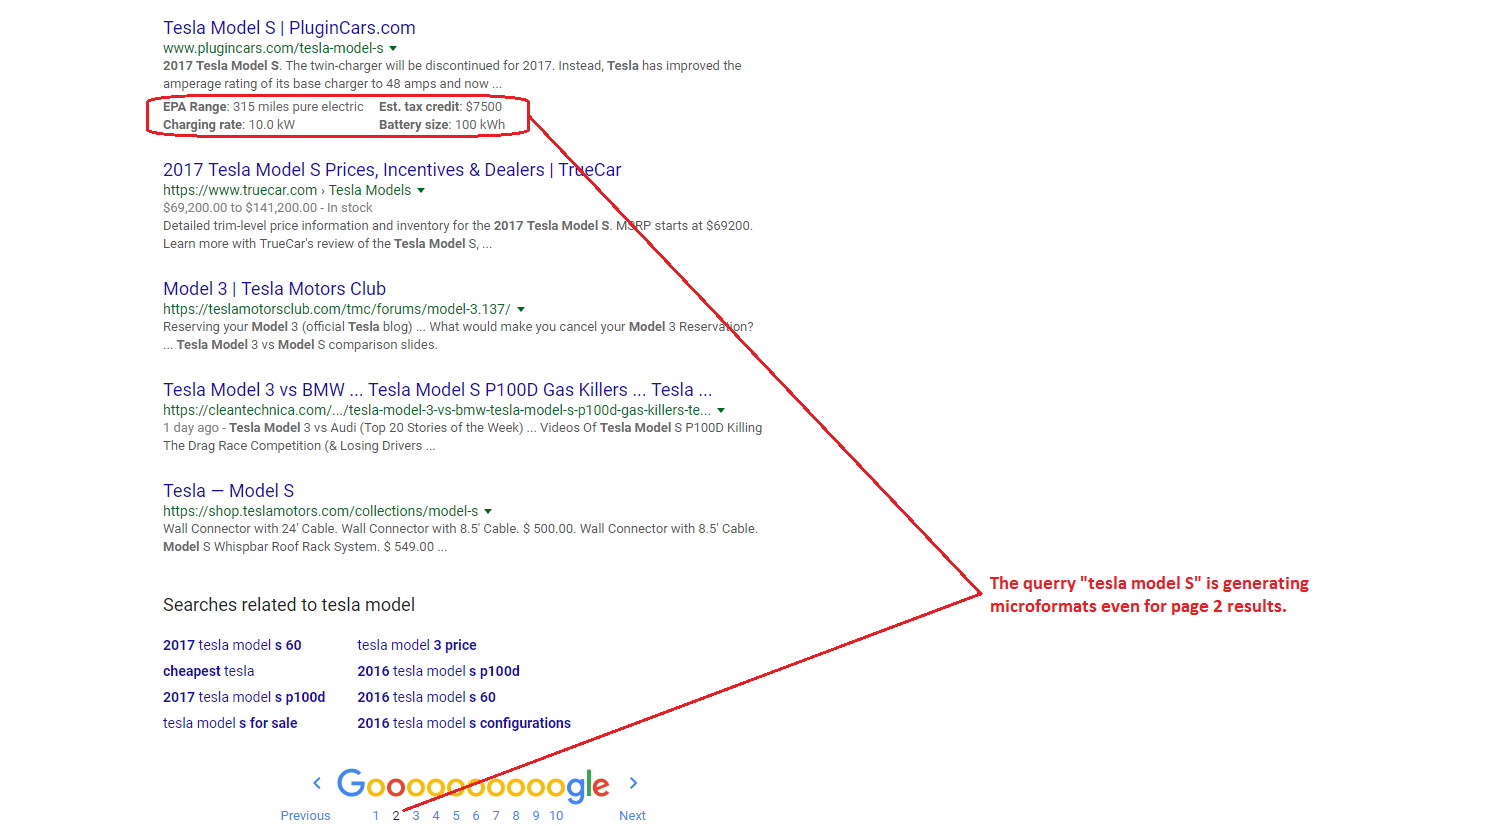 HTML Tables as Google Rich Snippets — Breakdown, Takeaways, Achieving The Snippet 16261788090842